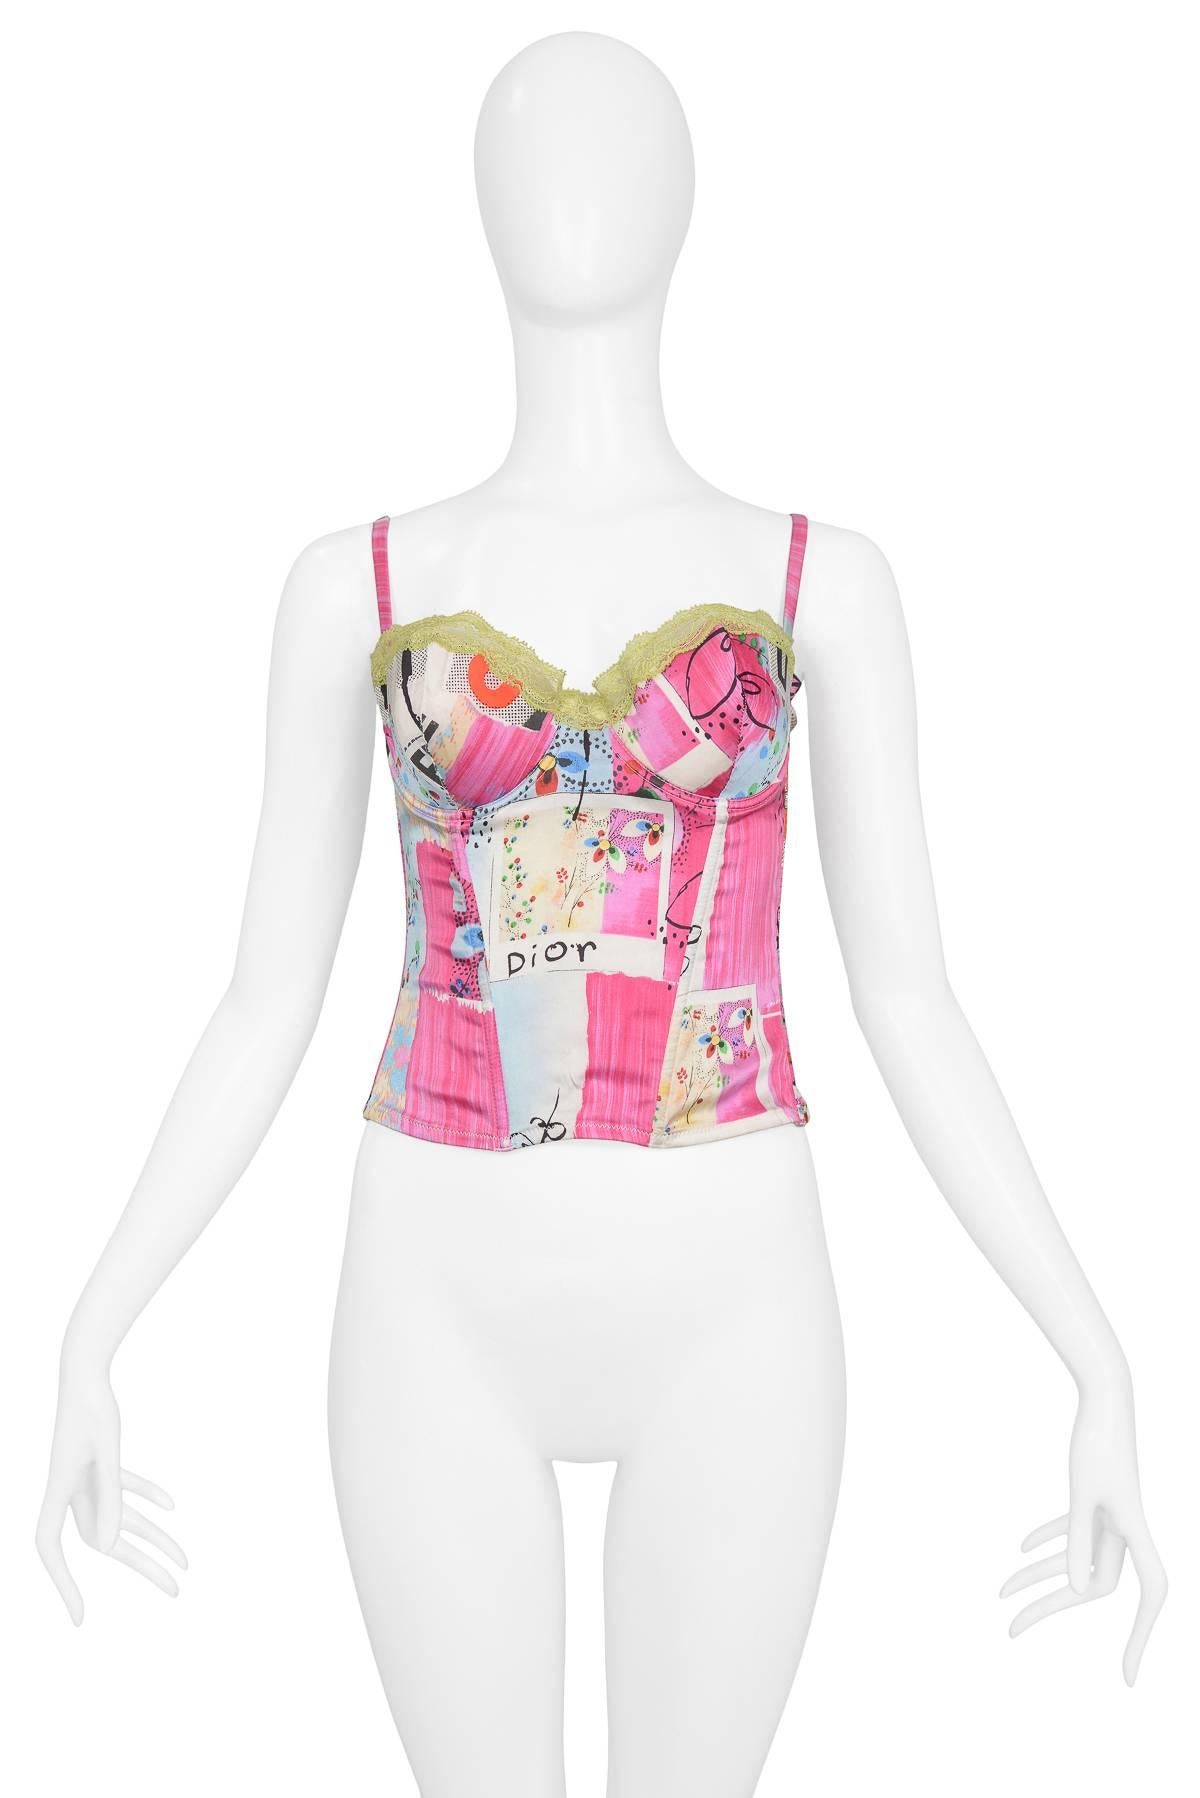 Christian Dior by John Galliano silk bustier with iconic 'Filth' print & chartruese lace detail. This piece features removable straps for a strapless option. Spring/Summer 2003 Collection.

Excellent Condition.

Size: 34